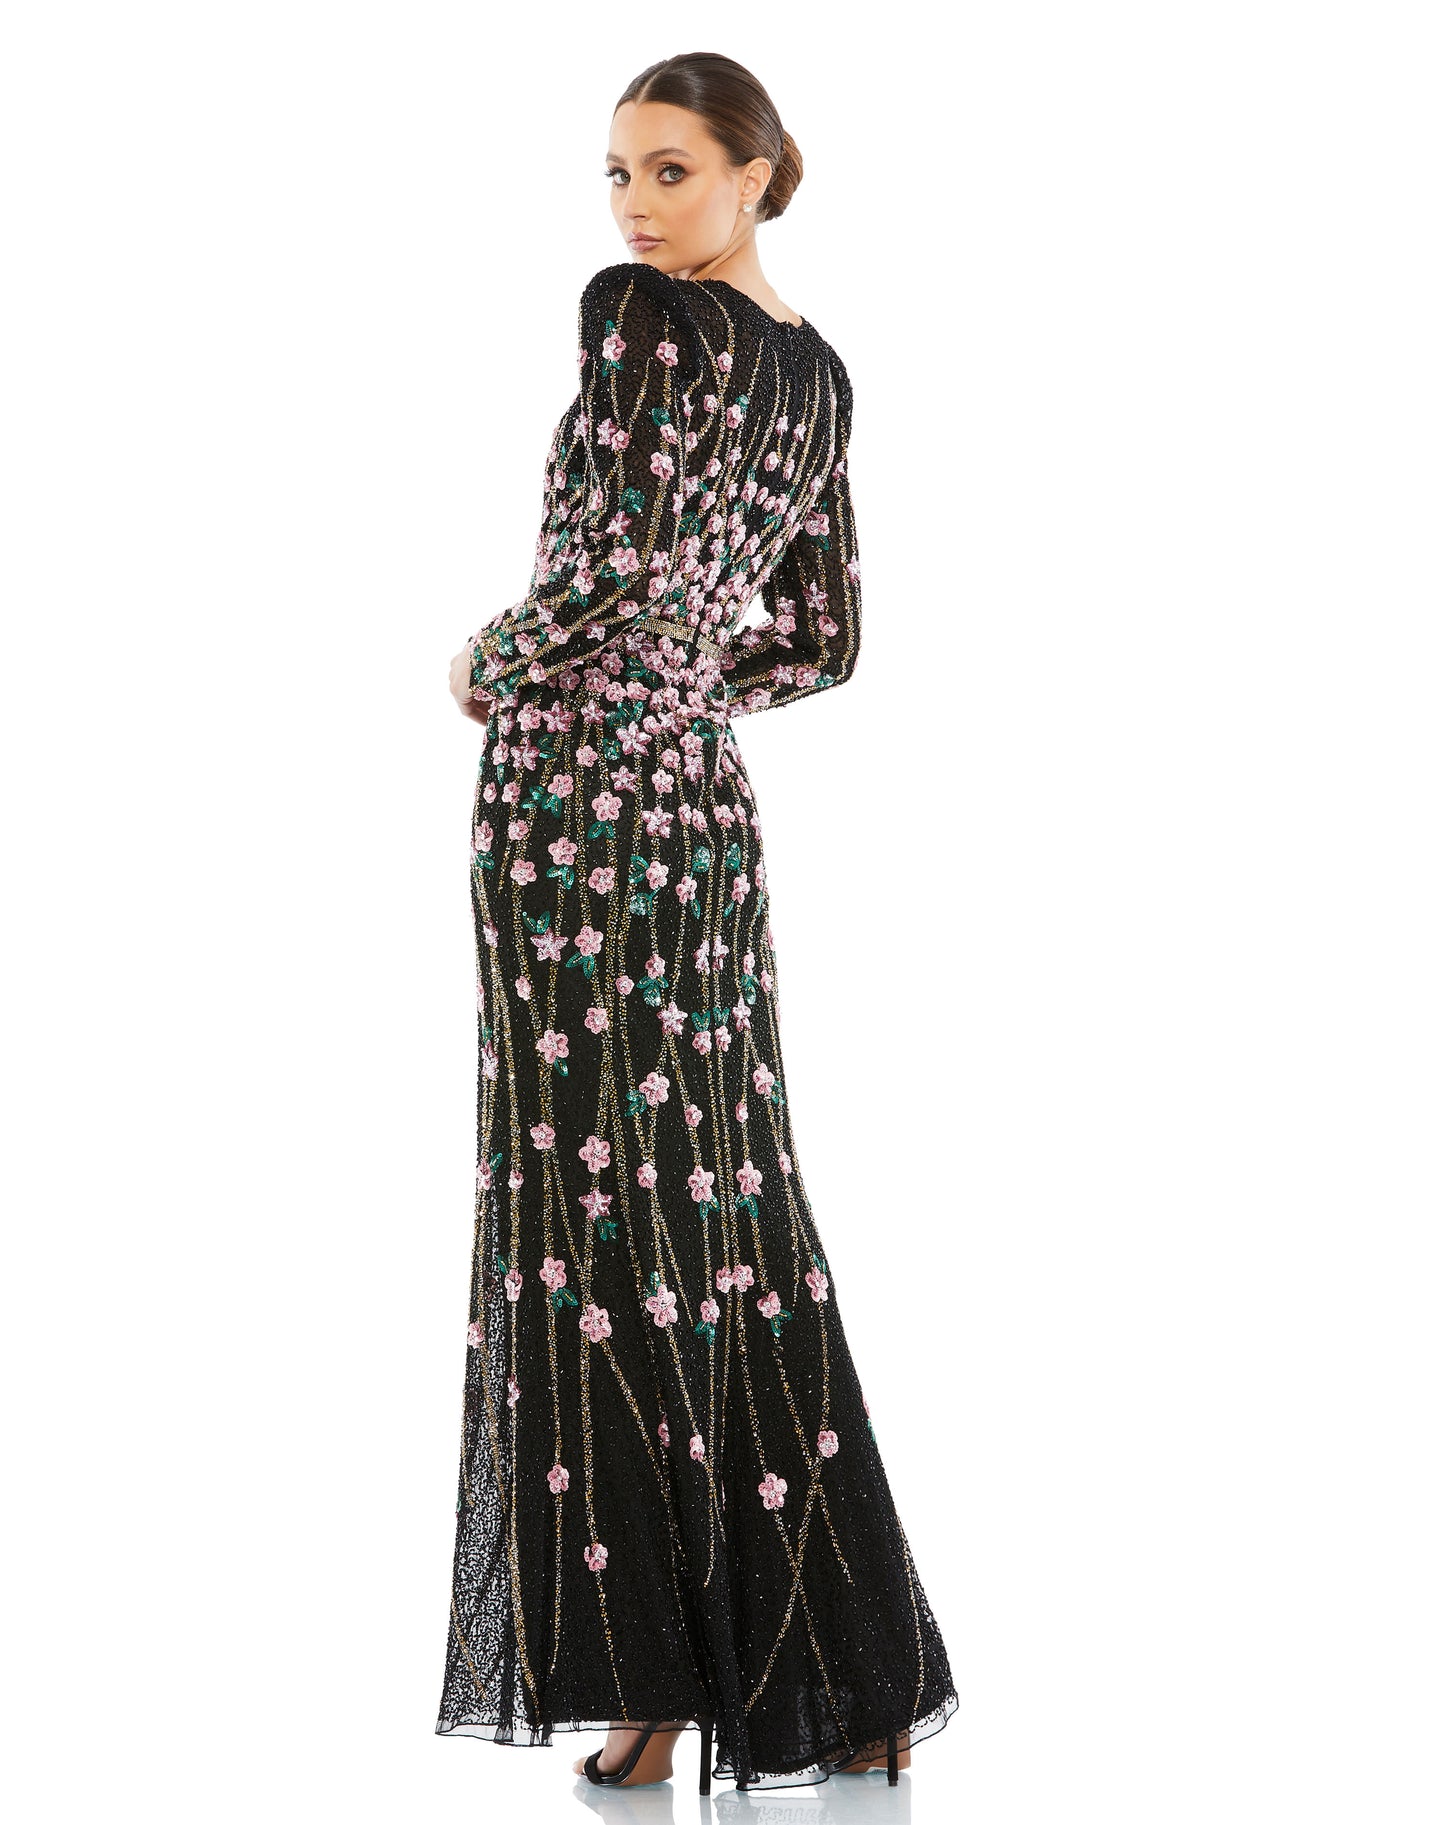 Embellished High Neck Long Sleeve Gown